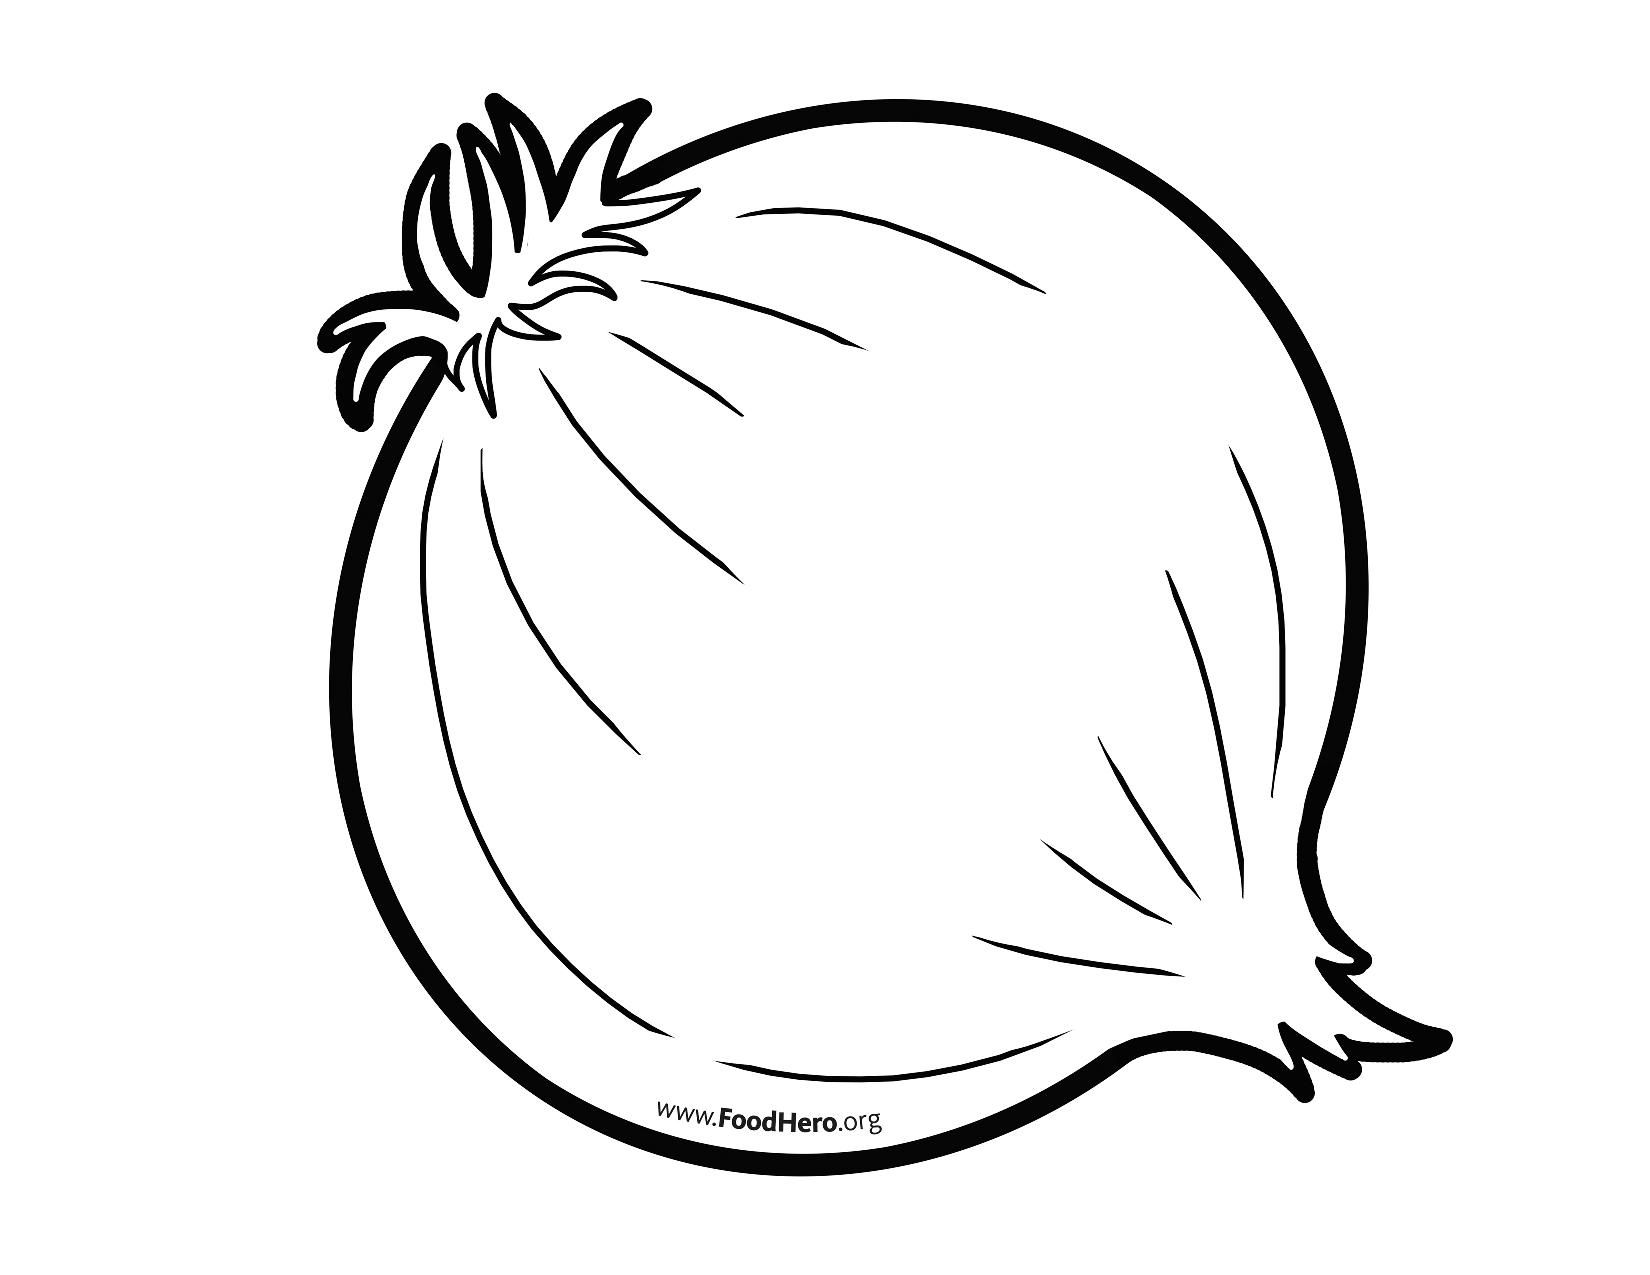 Onion outline from FoodHero.org | Art drawings for kids, Onion pictures,  Sea crafts